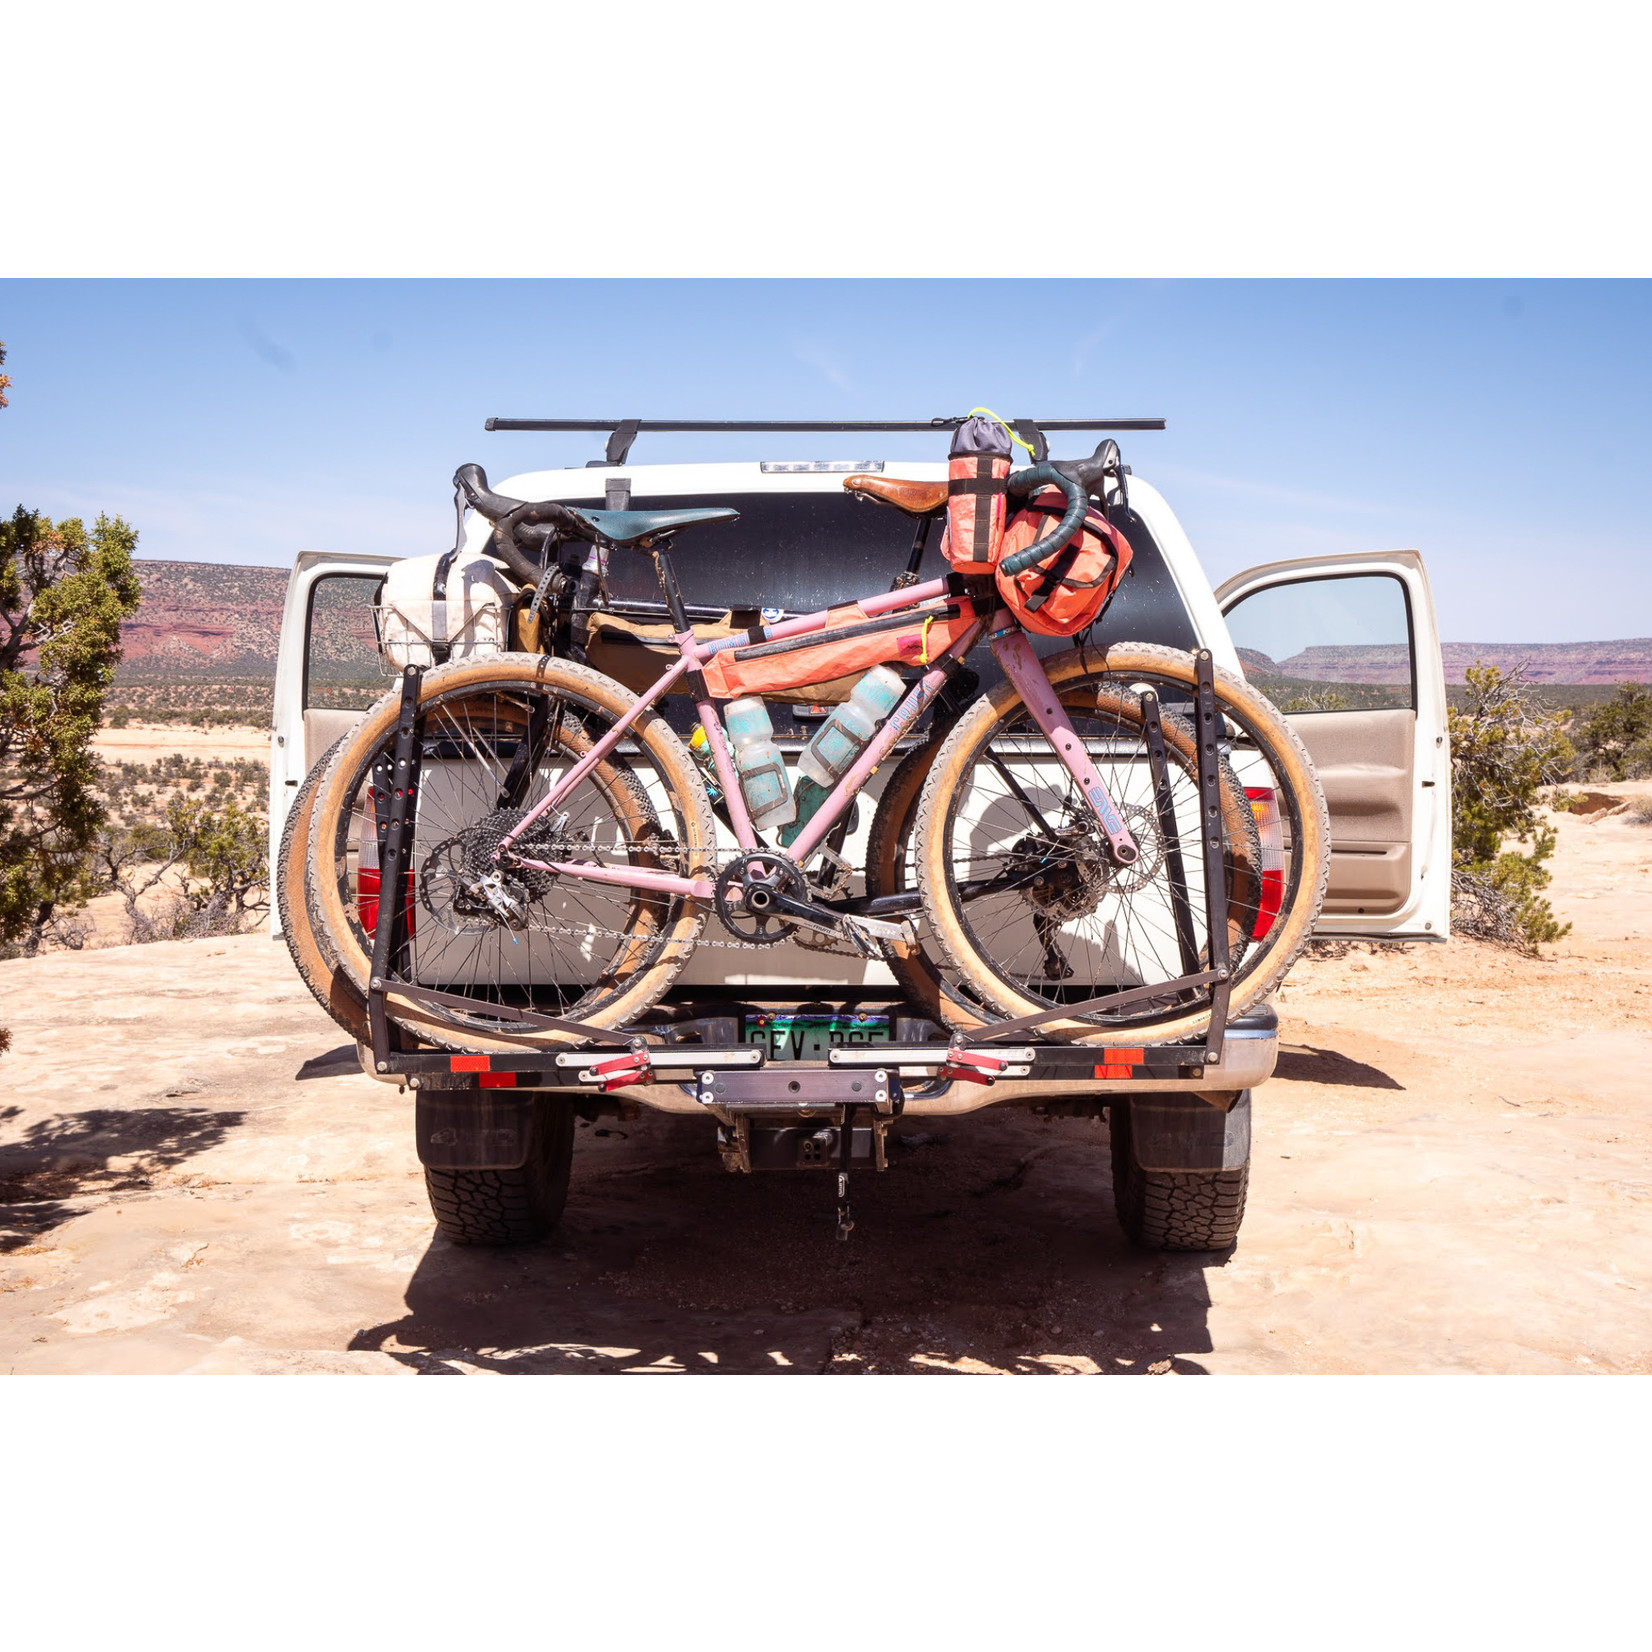 Swift Industries Swift Industries Hold Fast Frame Bag 2022 Campout Edition - Coral